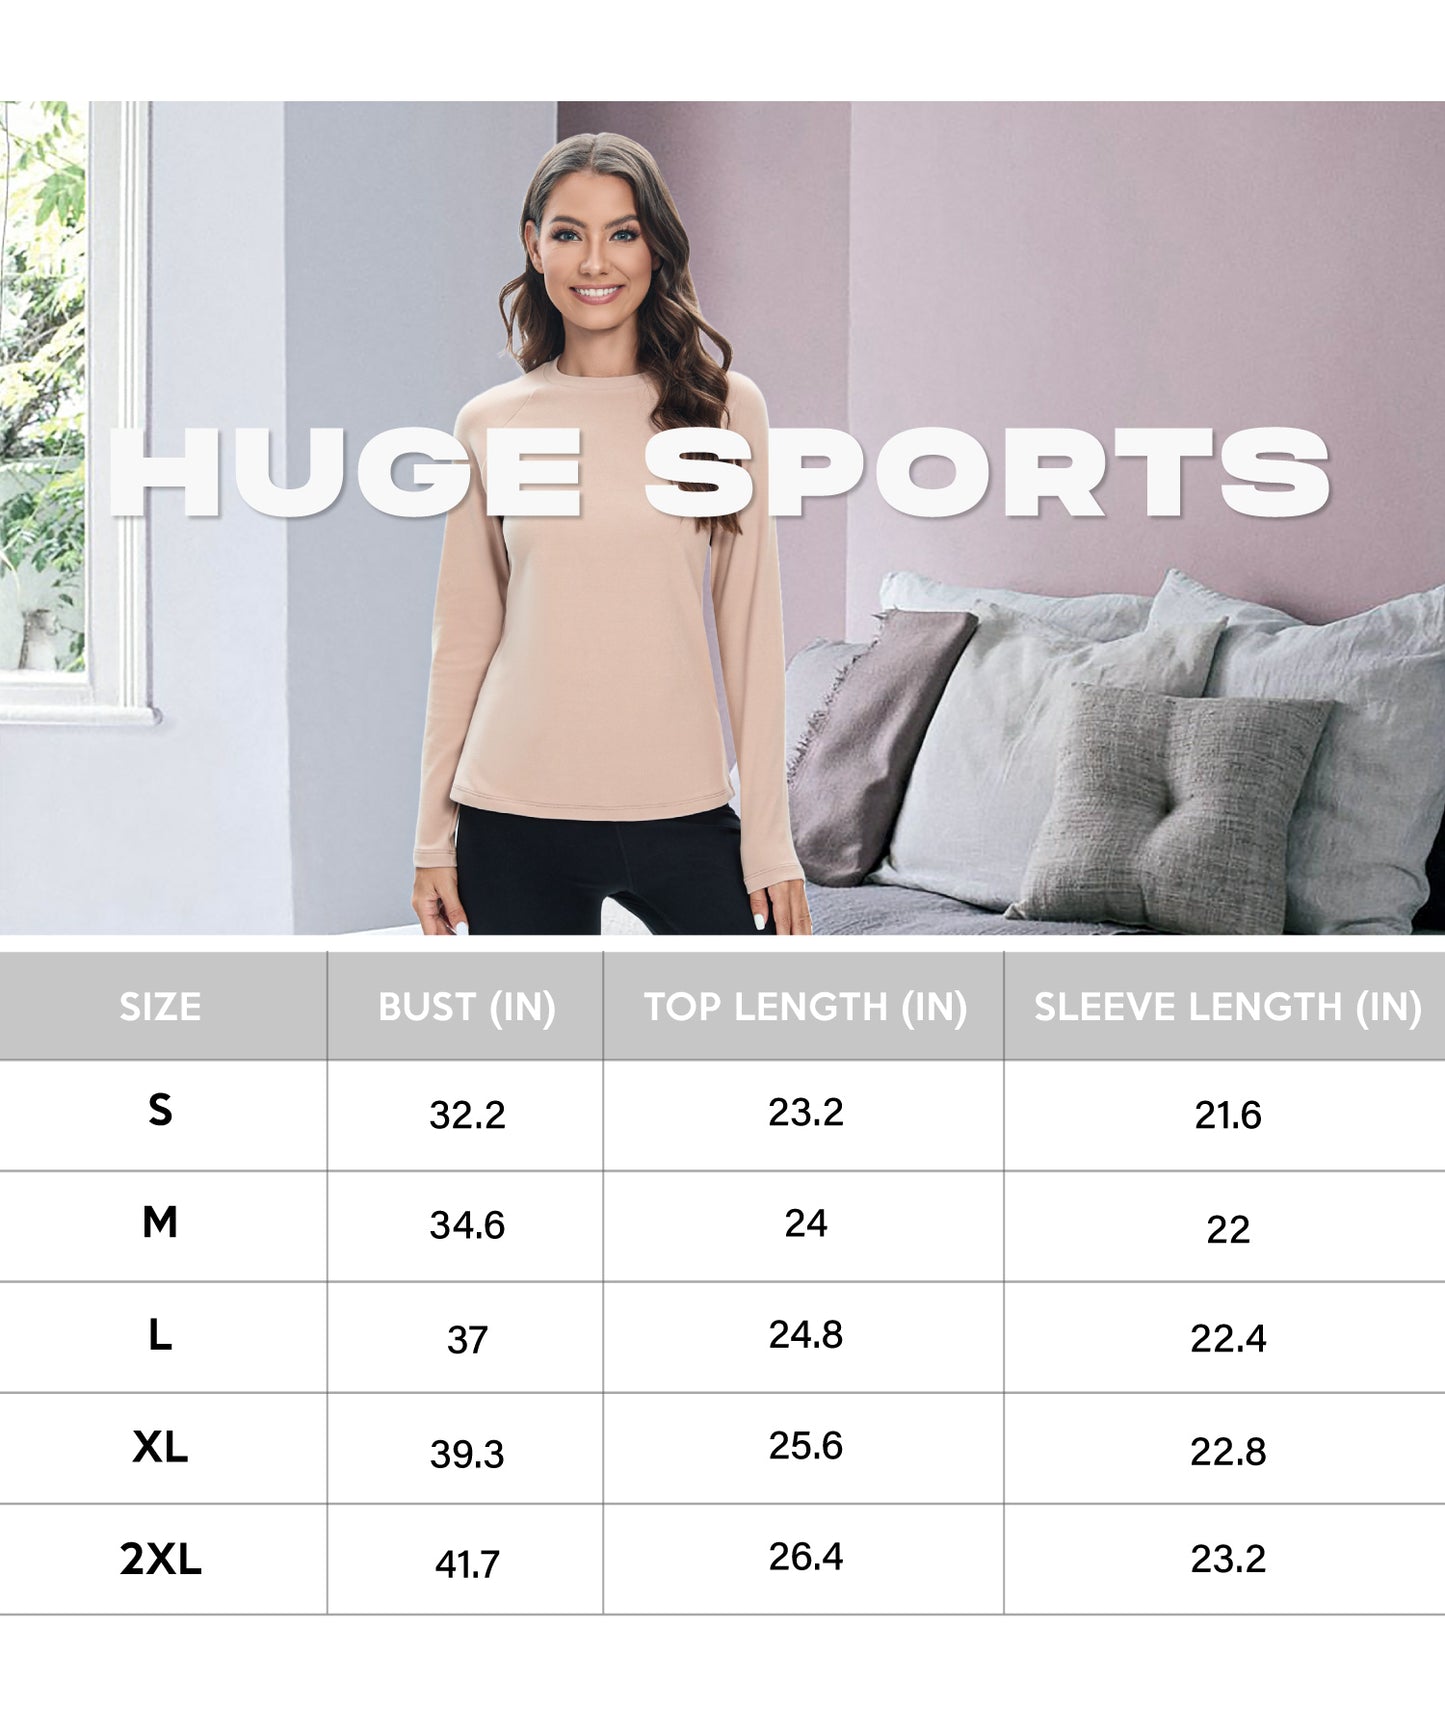 HUGE SPORTS Women Thermal Fleece Top Shirts Workout Pullover Tops Thermal Underwear Tops